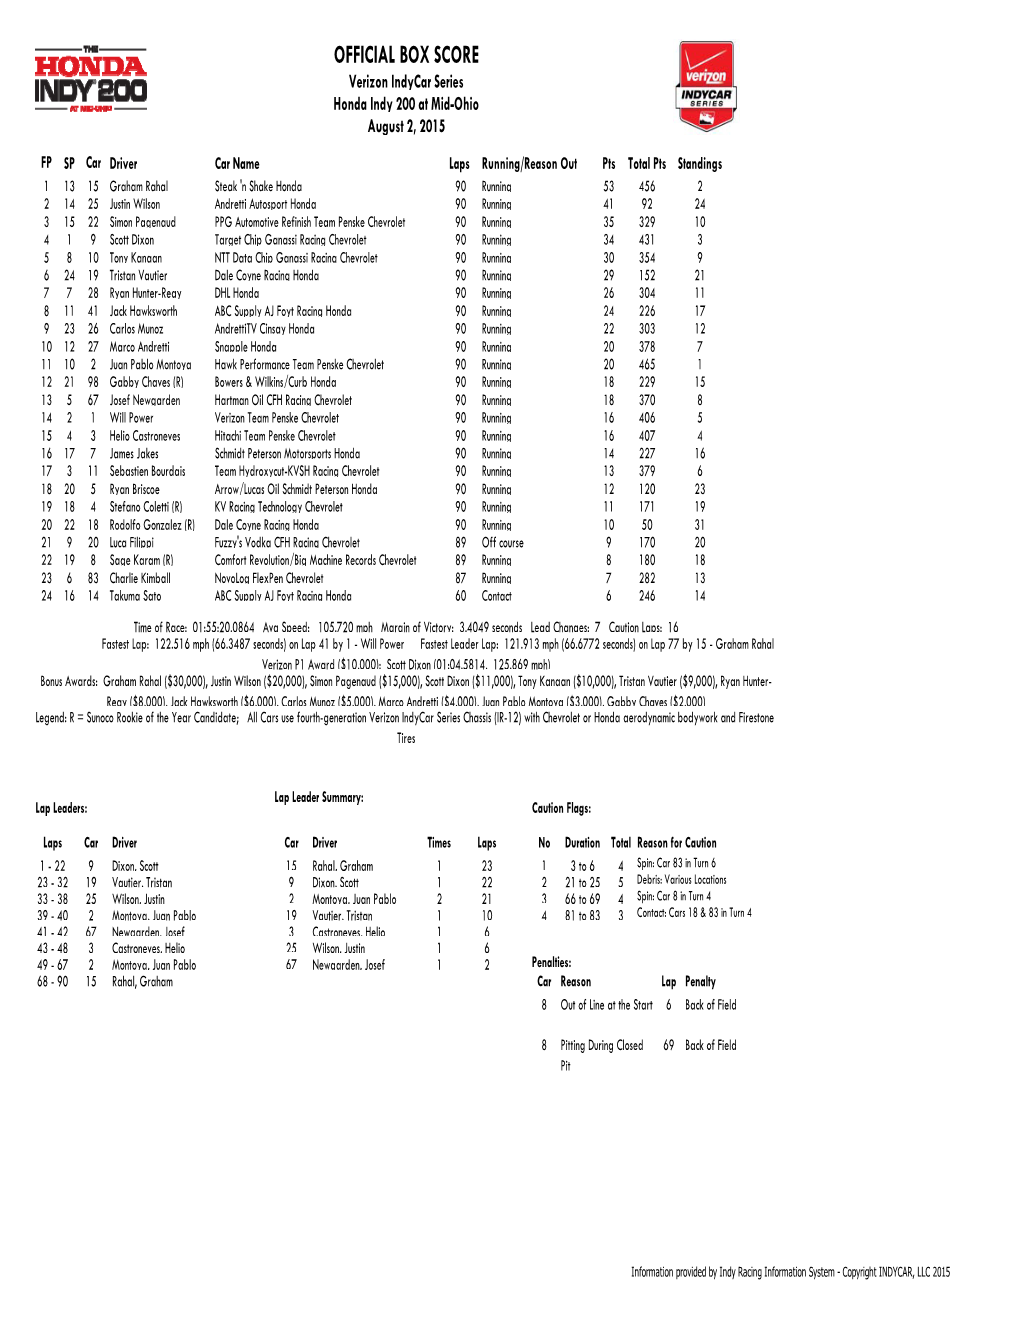 OFFICIAL BOX SCORE Verizon Indycar Series Honda Indy 200 at Mid-Ohio August 2, 2015